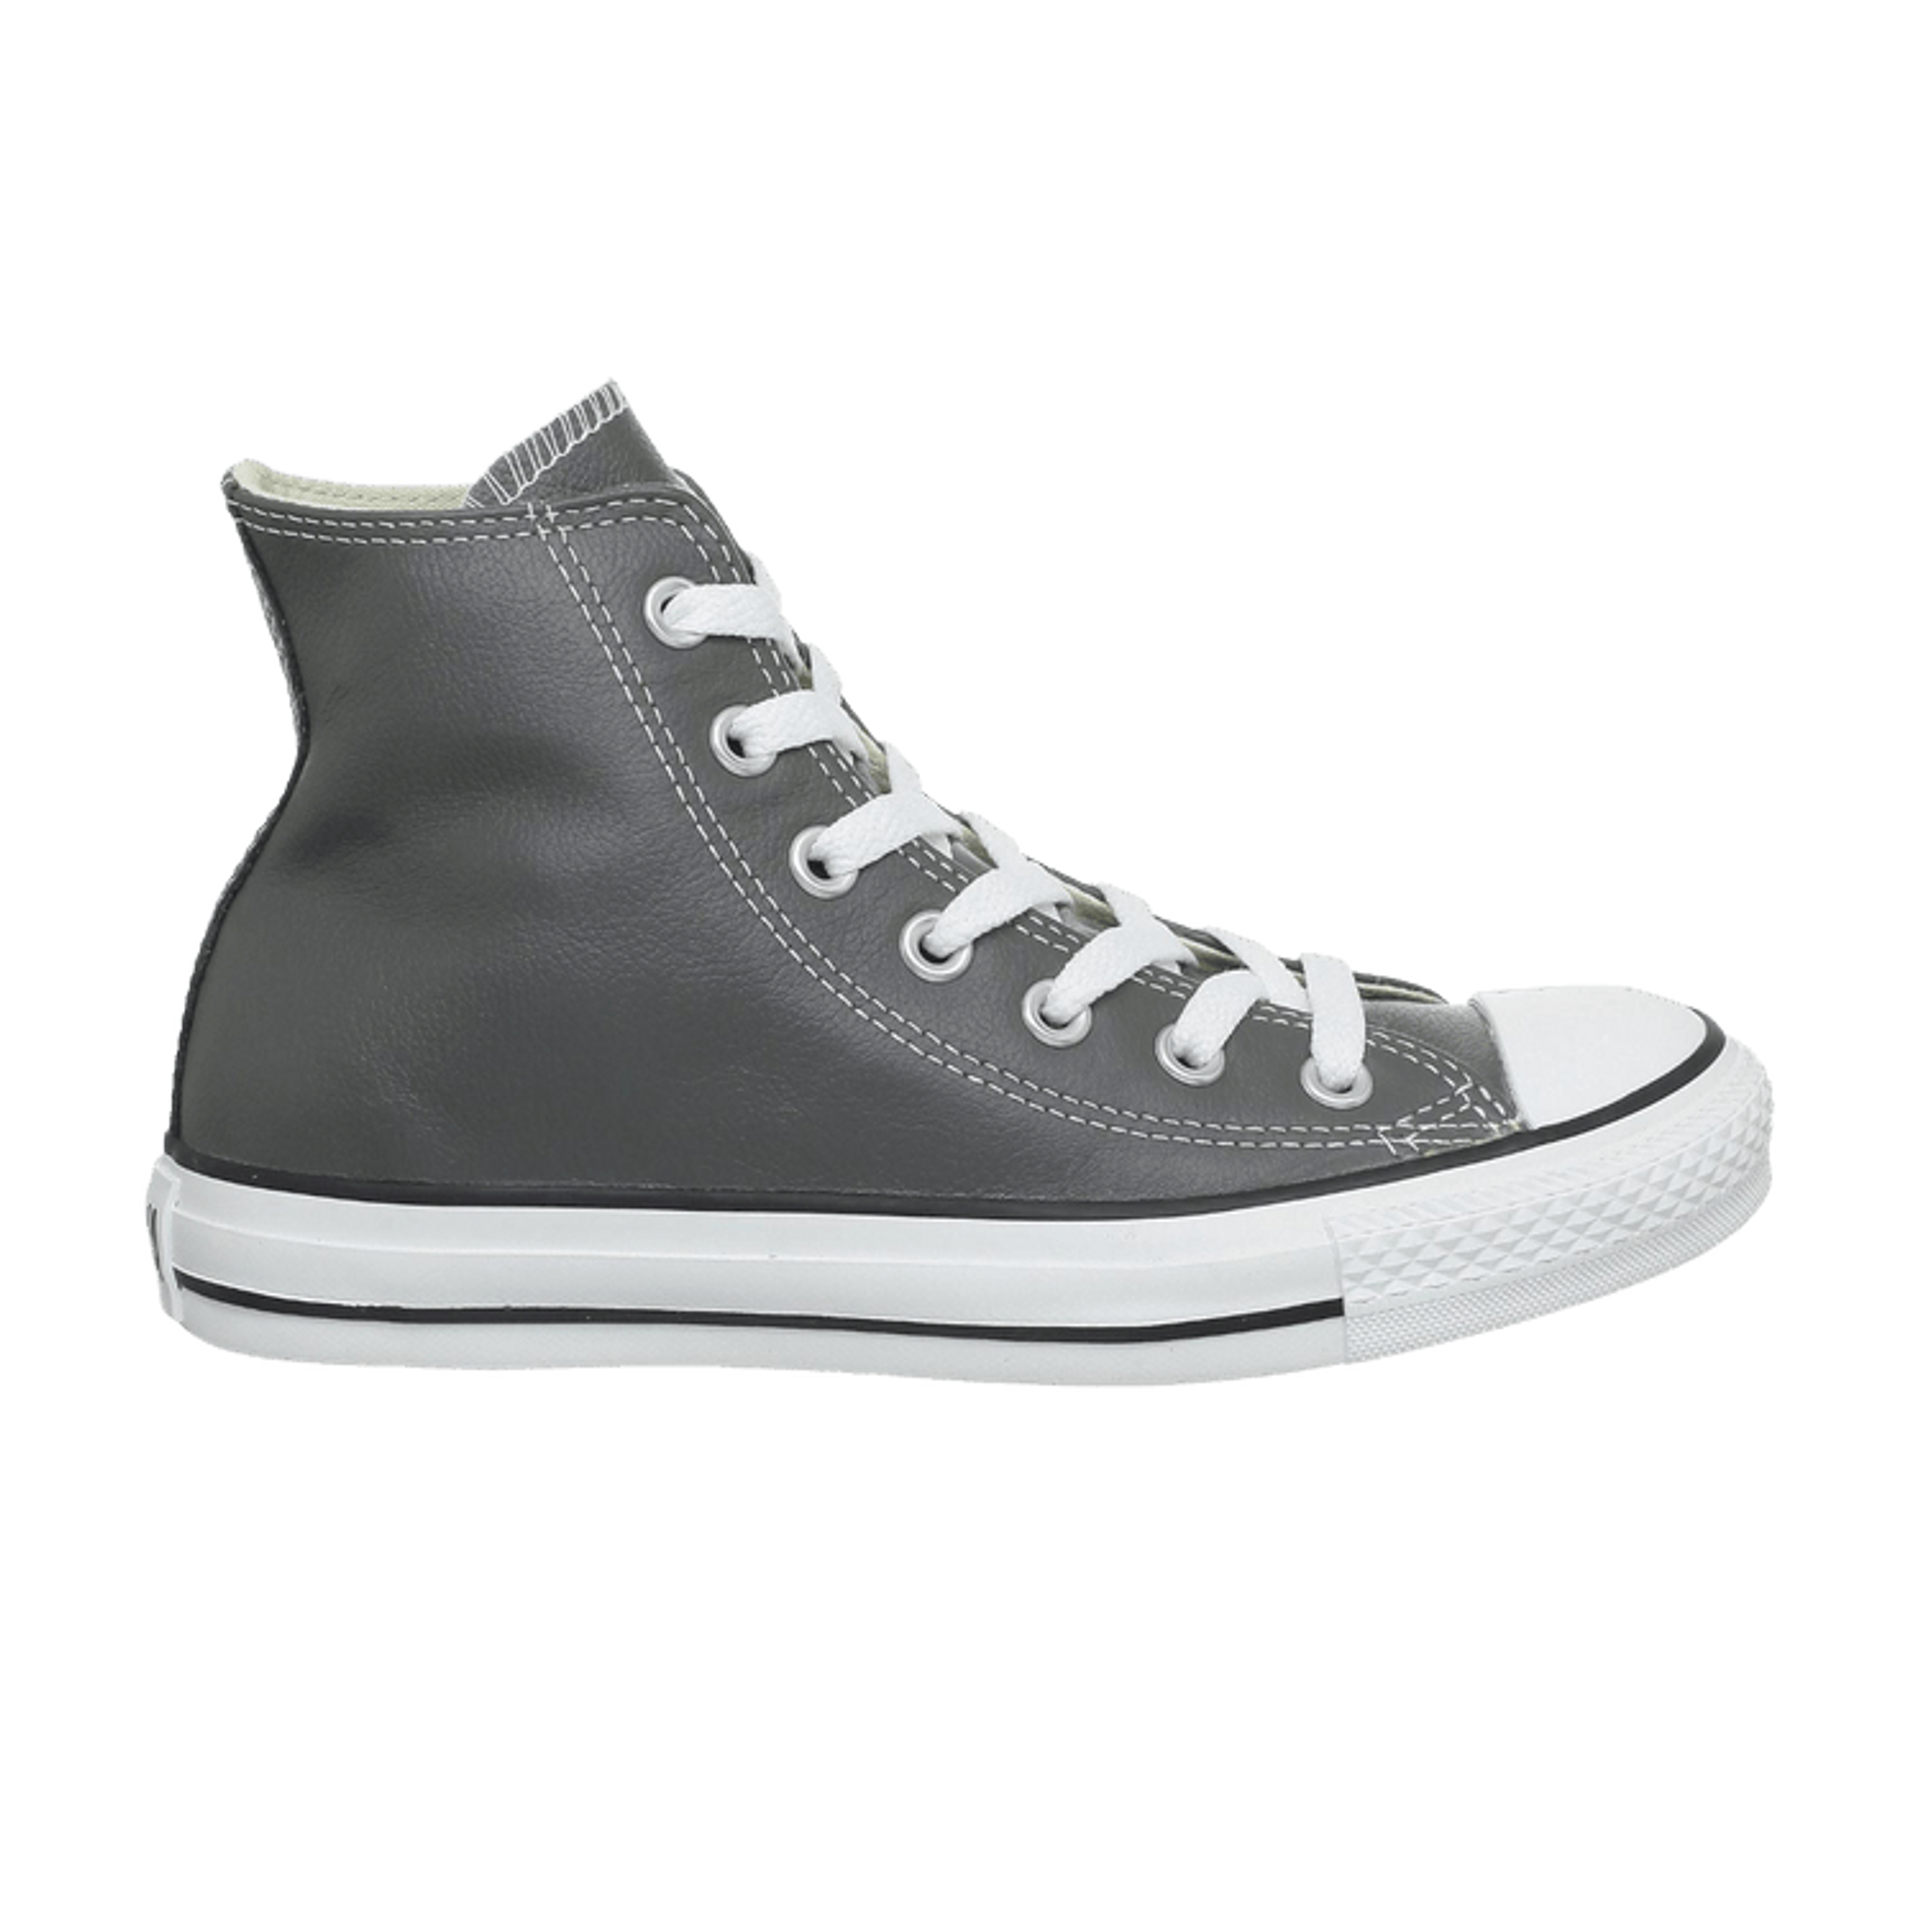 Converse Chuck Taylor All Star Leather Hi 'Charcoal'